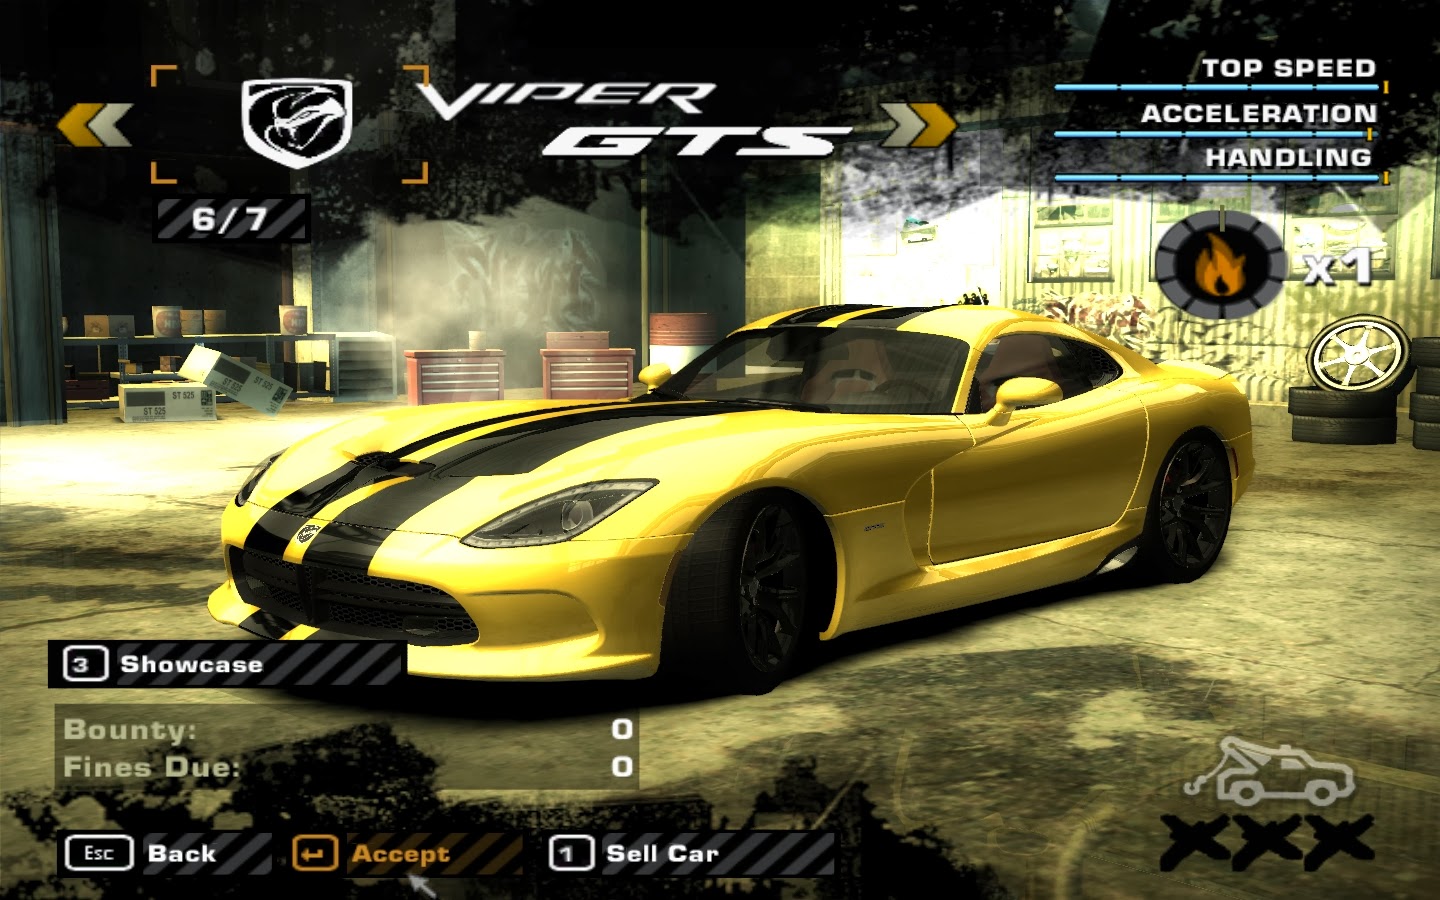 need for speed most wanted 2013 trainer v1.1.0.0